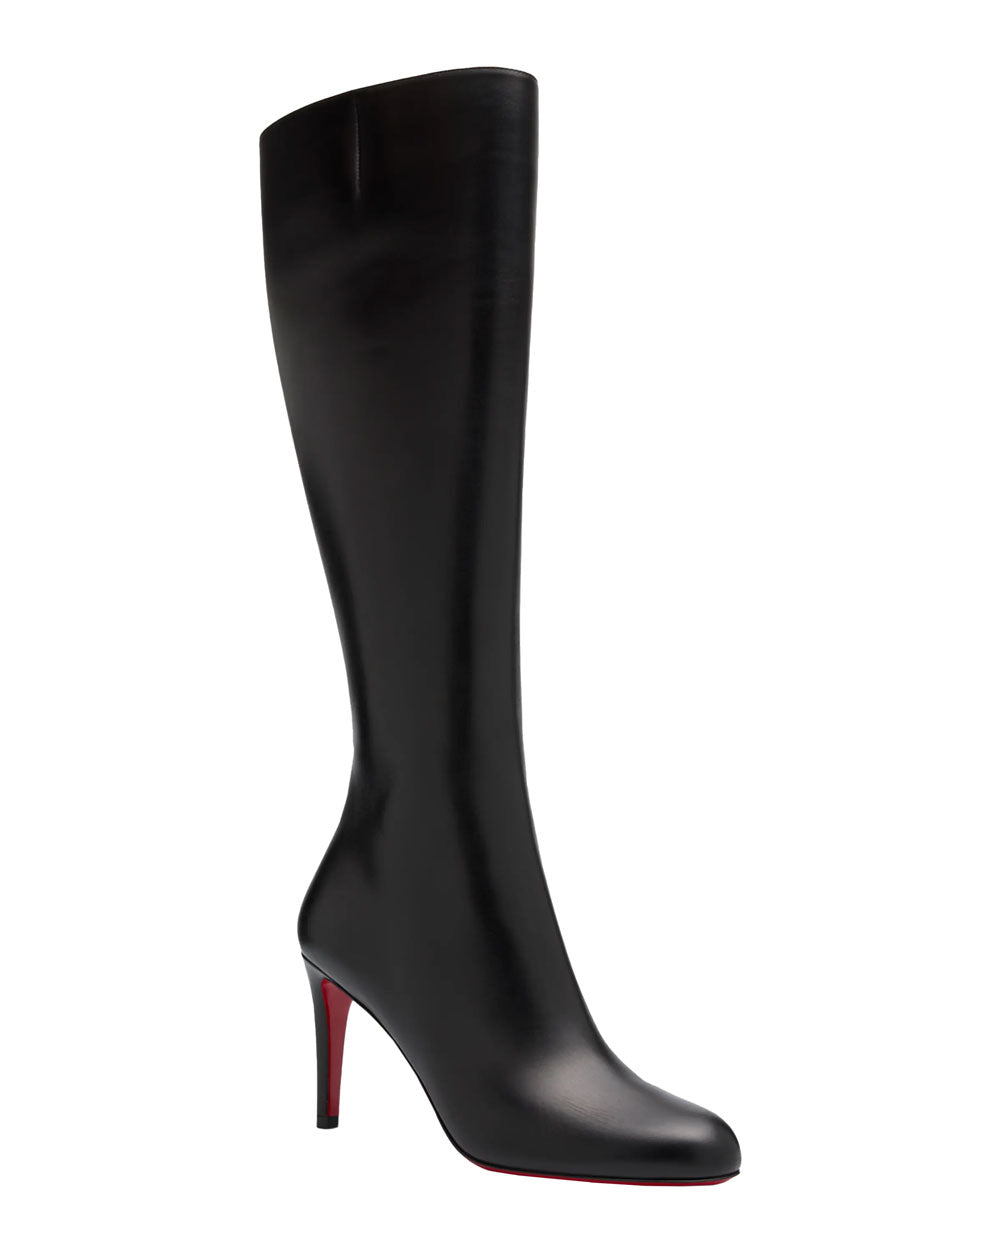 CHRISTIAN LOUBOUTIN Pumppie 85 leather knee boots in 2023  Leather knee  boots, Christian louboutin, Red bottom high heels